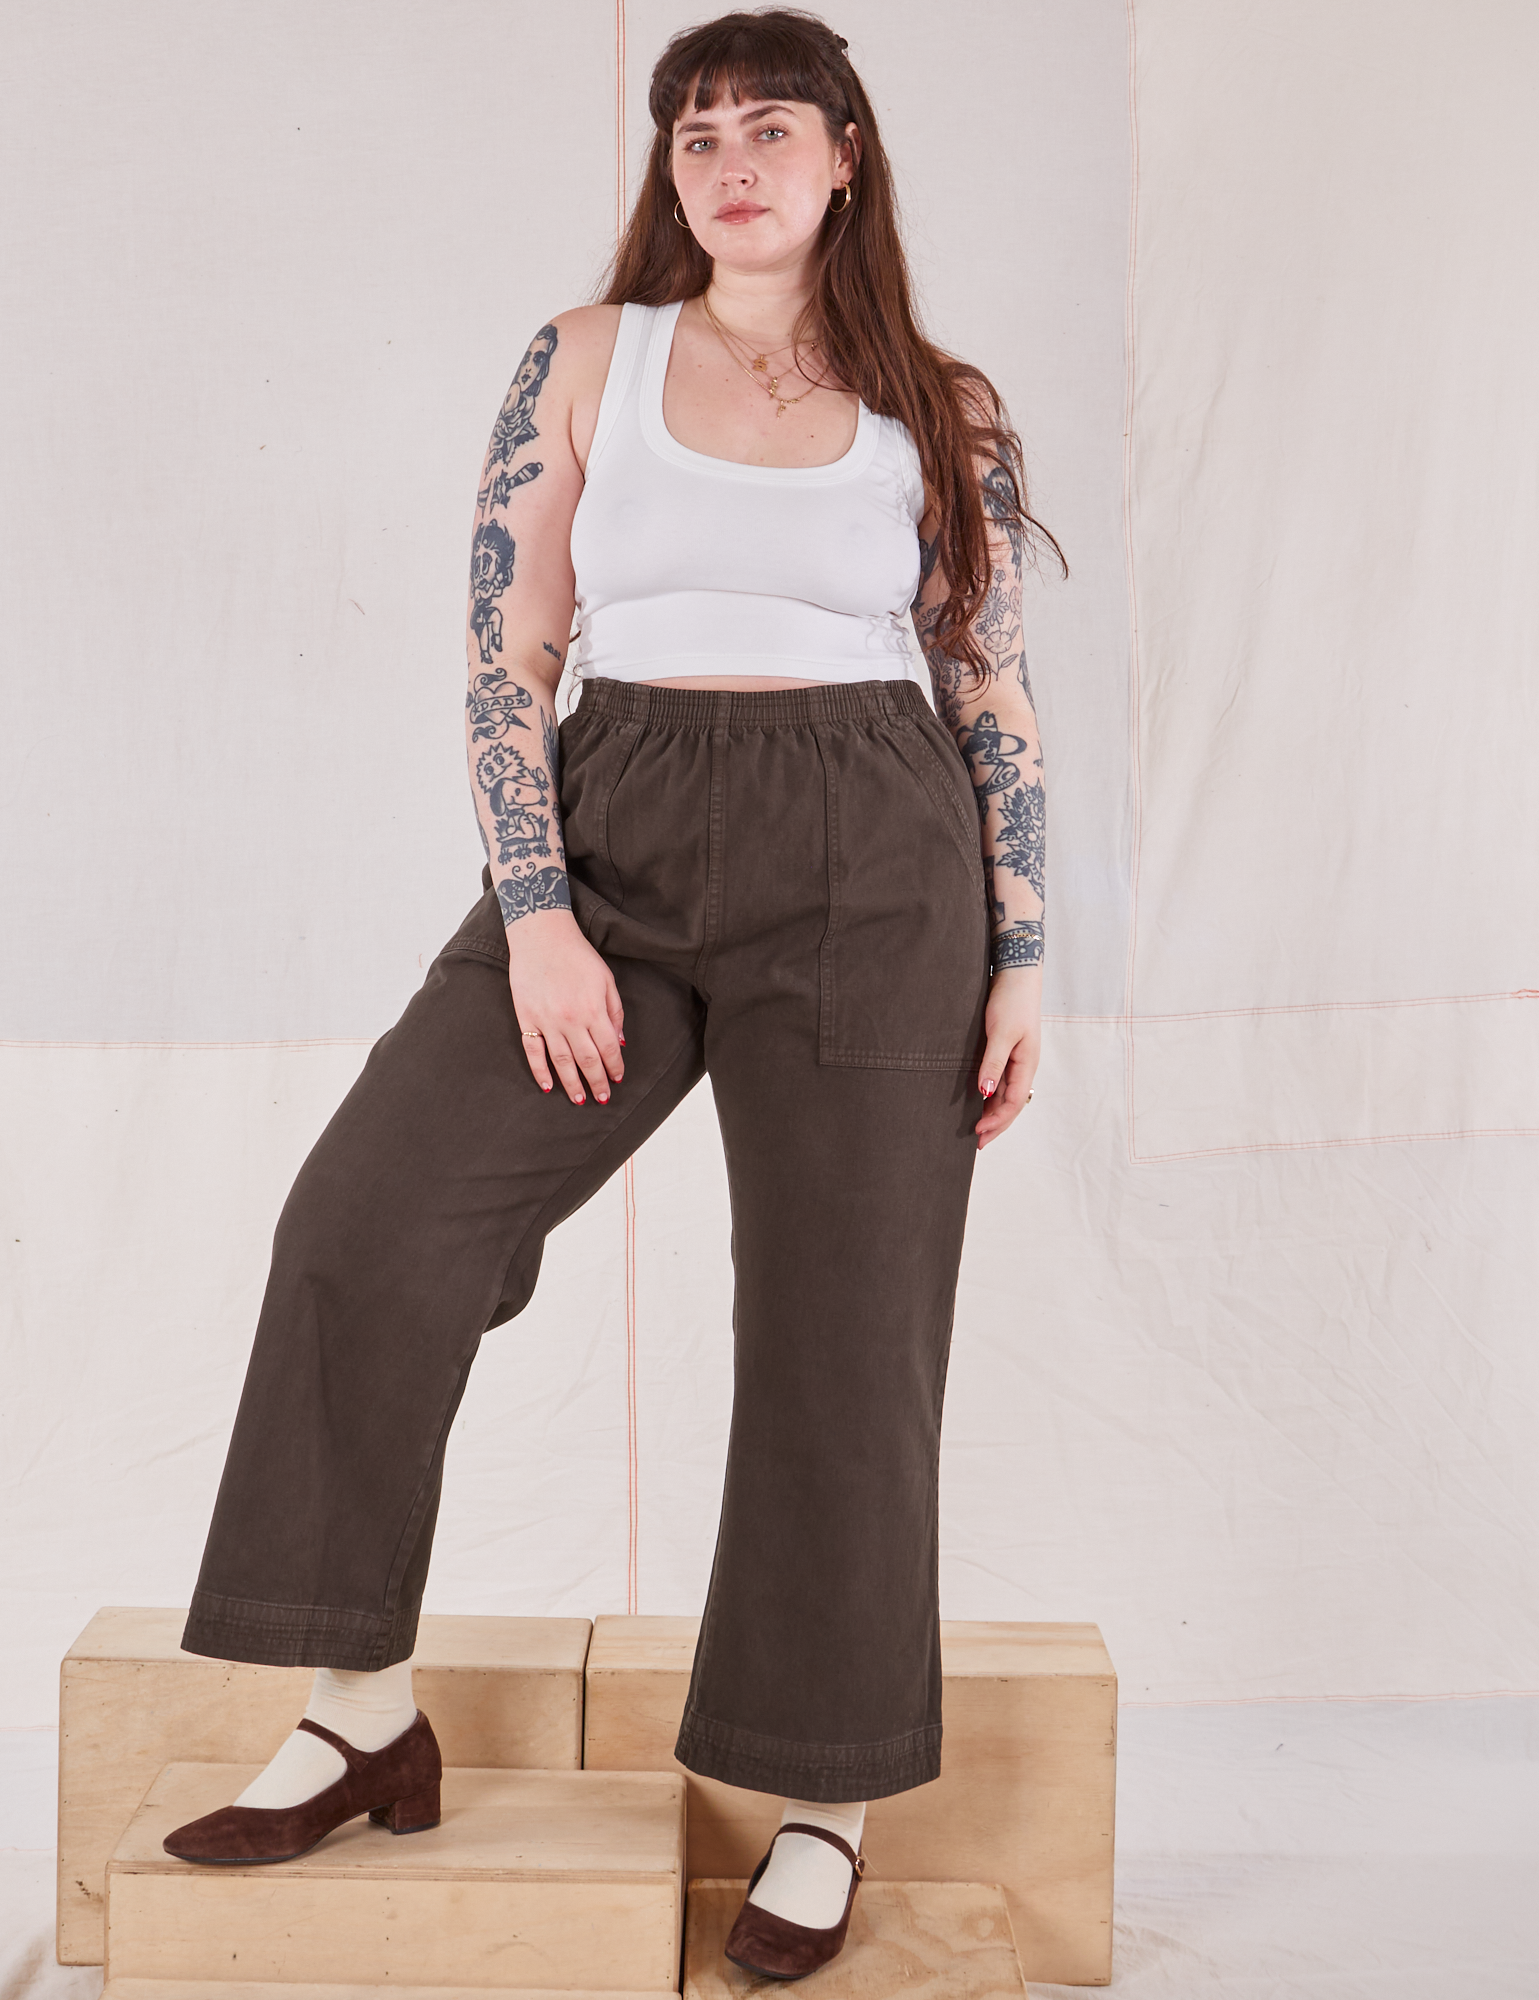 Sydney is 5'9" and wearing L Action Pants in Espresso Brown paired with Cropped Tank in vintage tee off-white